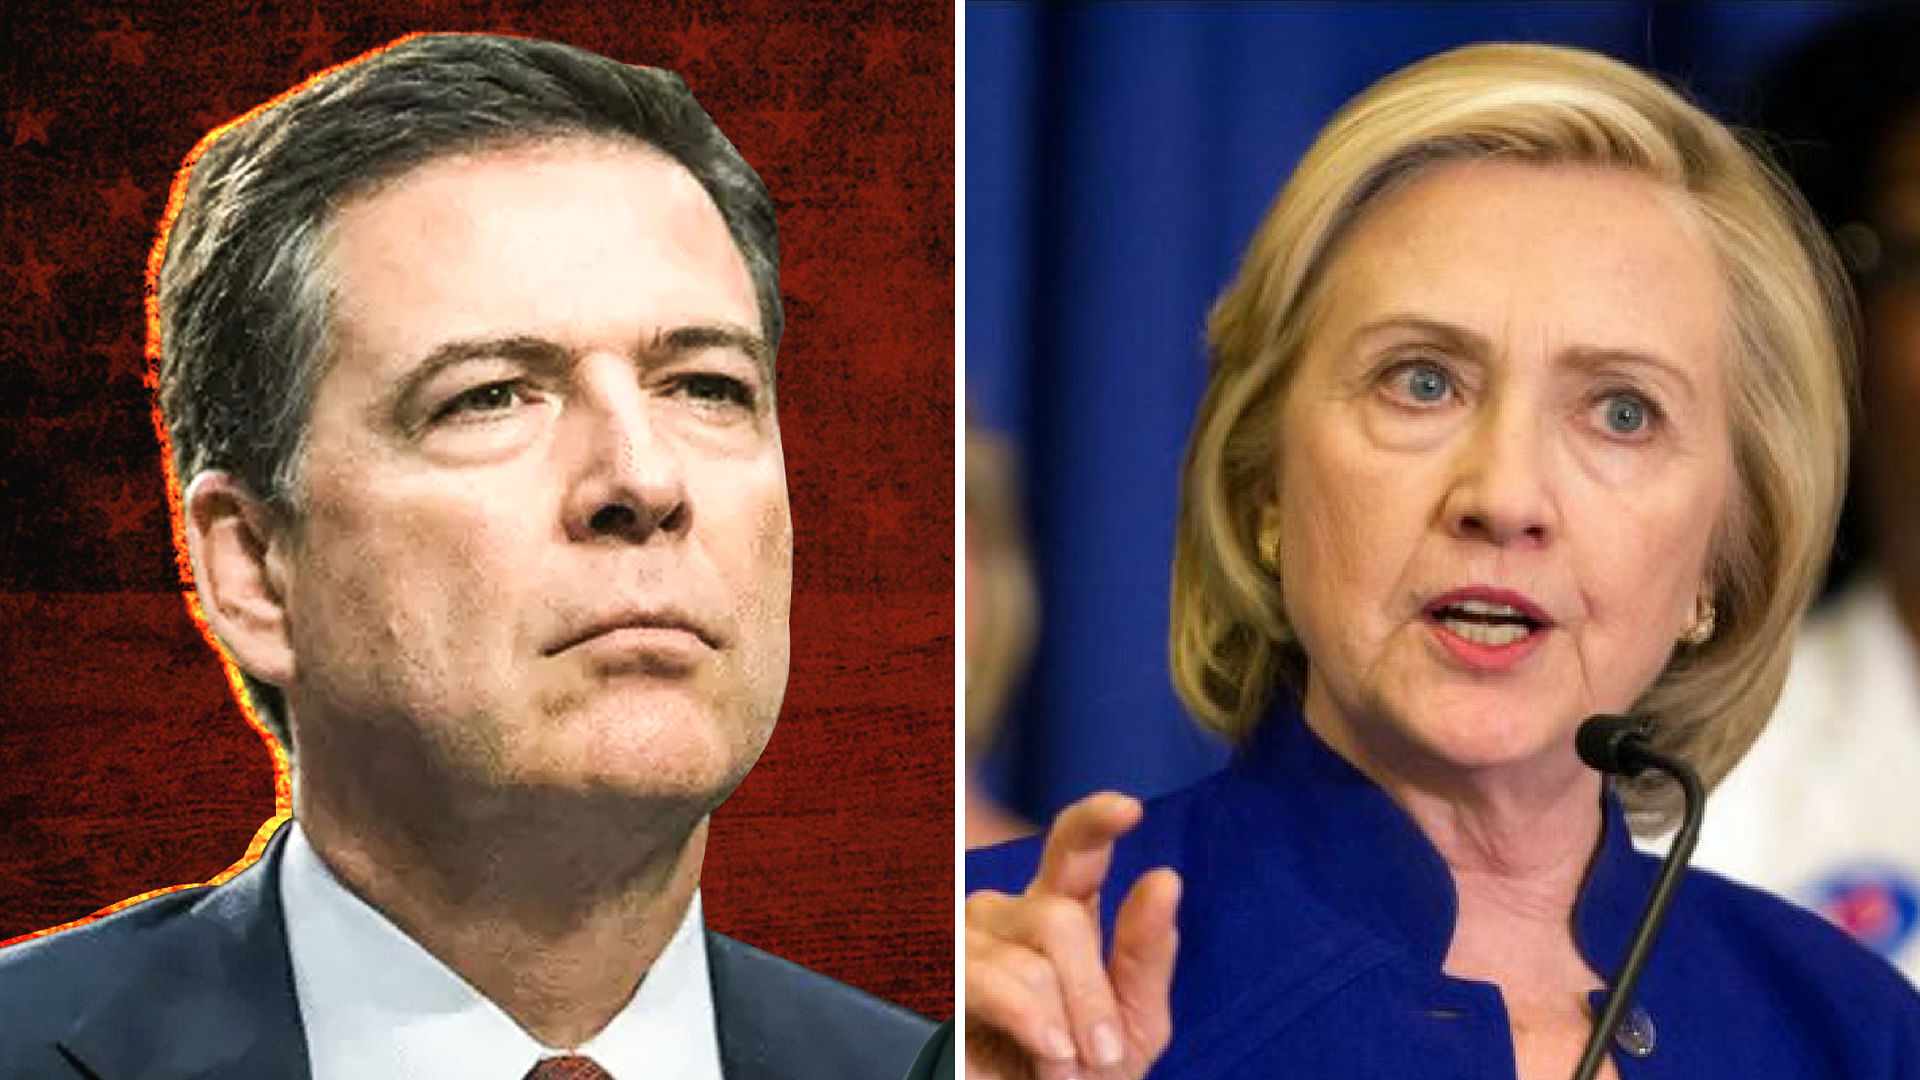  Former FBI Director James Comey and 2016 presidential candidate Hillary Clinton.